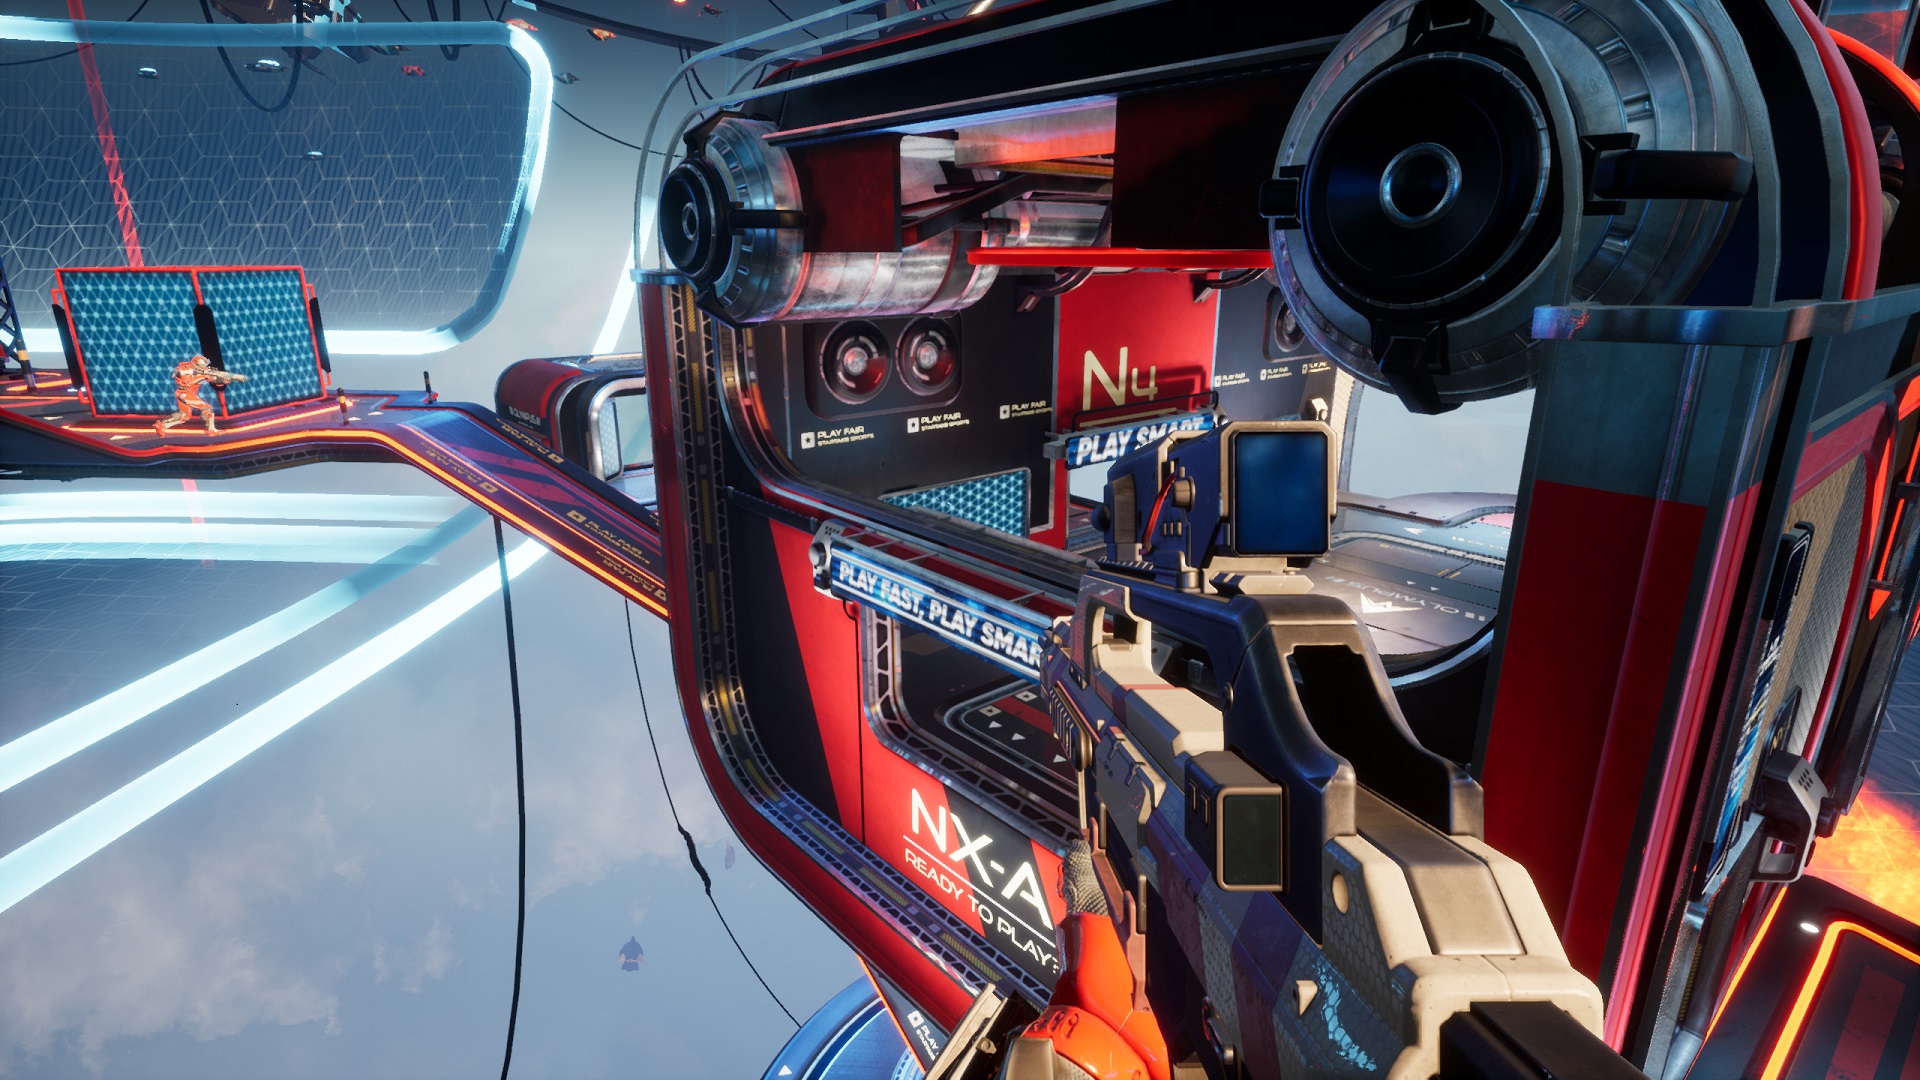 Splitgate: Arena Warfare - Hands-on preview from GDC 2019